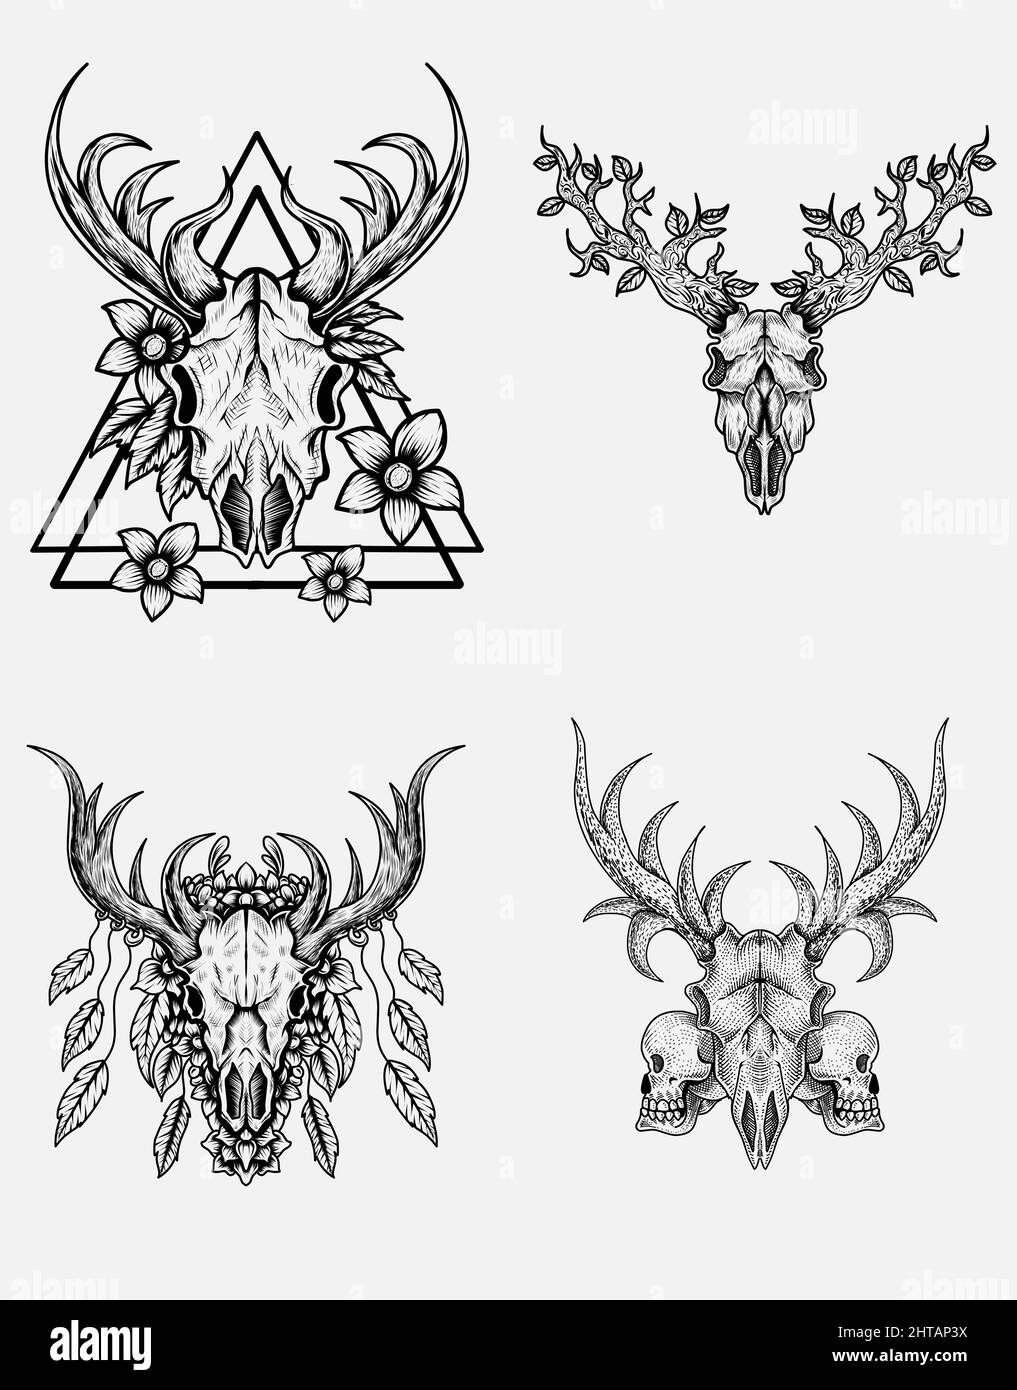 Deer Skull and Antlers by Two Best Temporary Tattoos| WannaBeInk.com